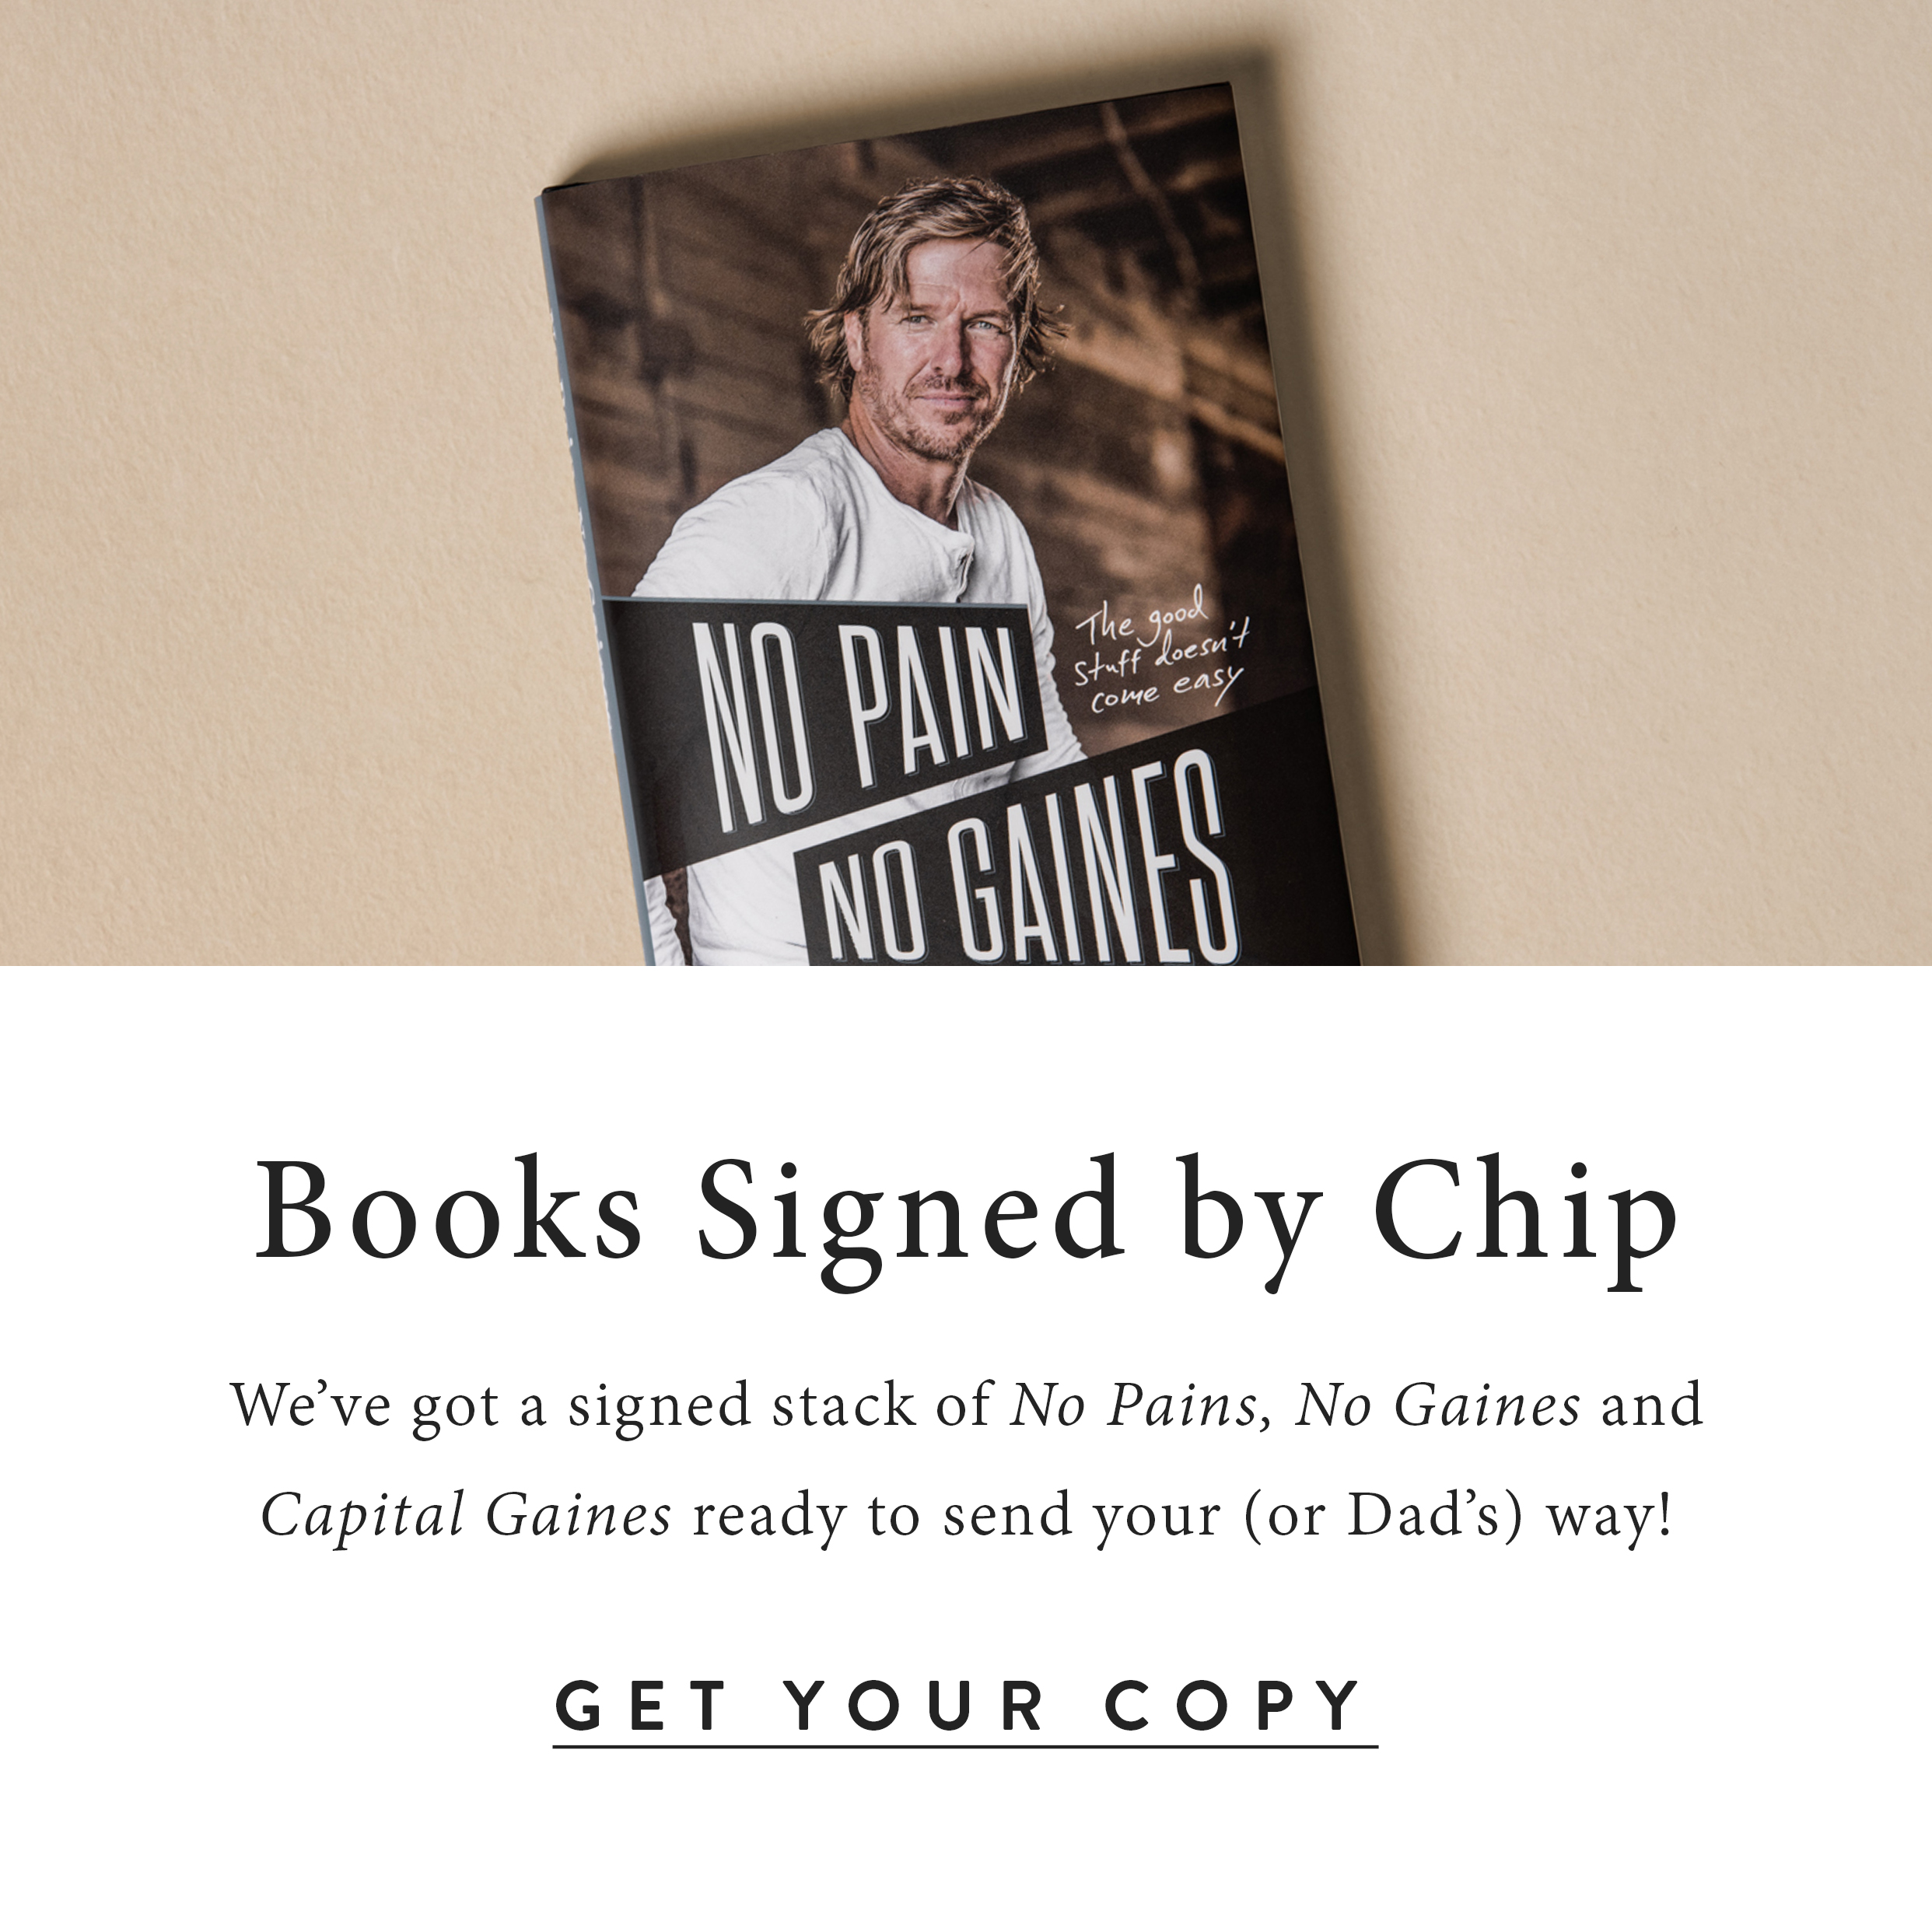 Books signed by Chip.  We've got a signed stack of No Pains, No Gaines and Capital Gaines ready to send your (or Dad's) way.  Buy your copy here.